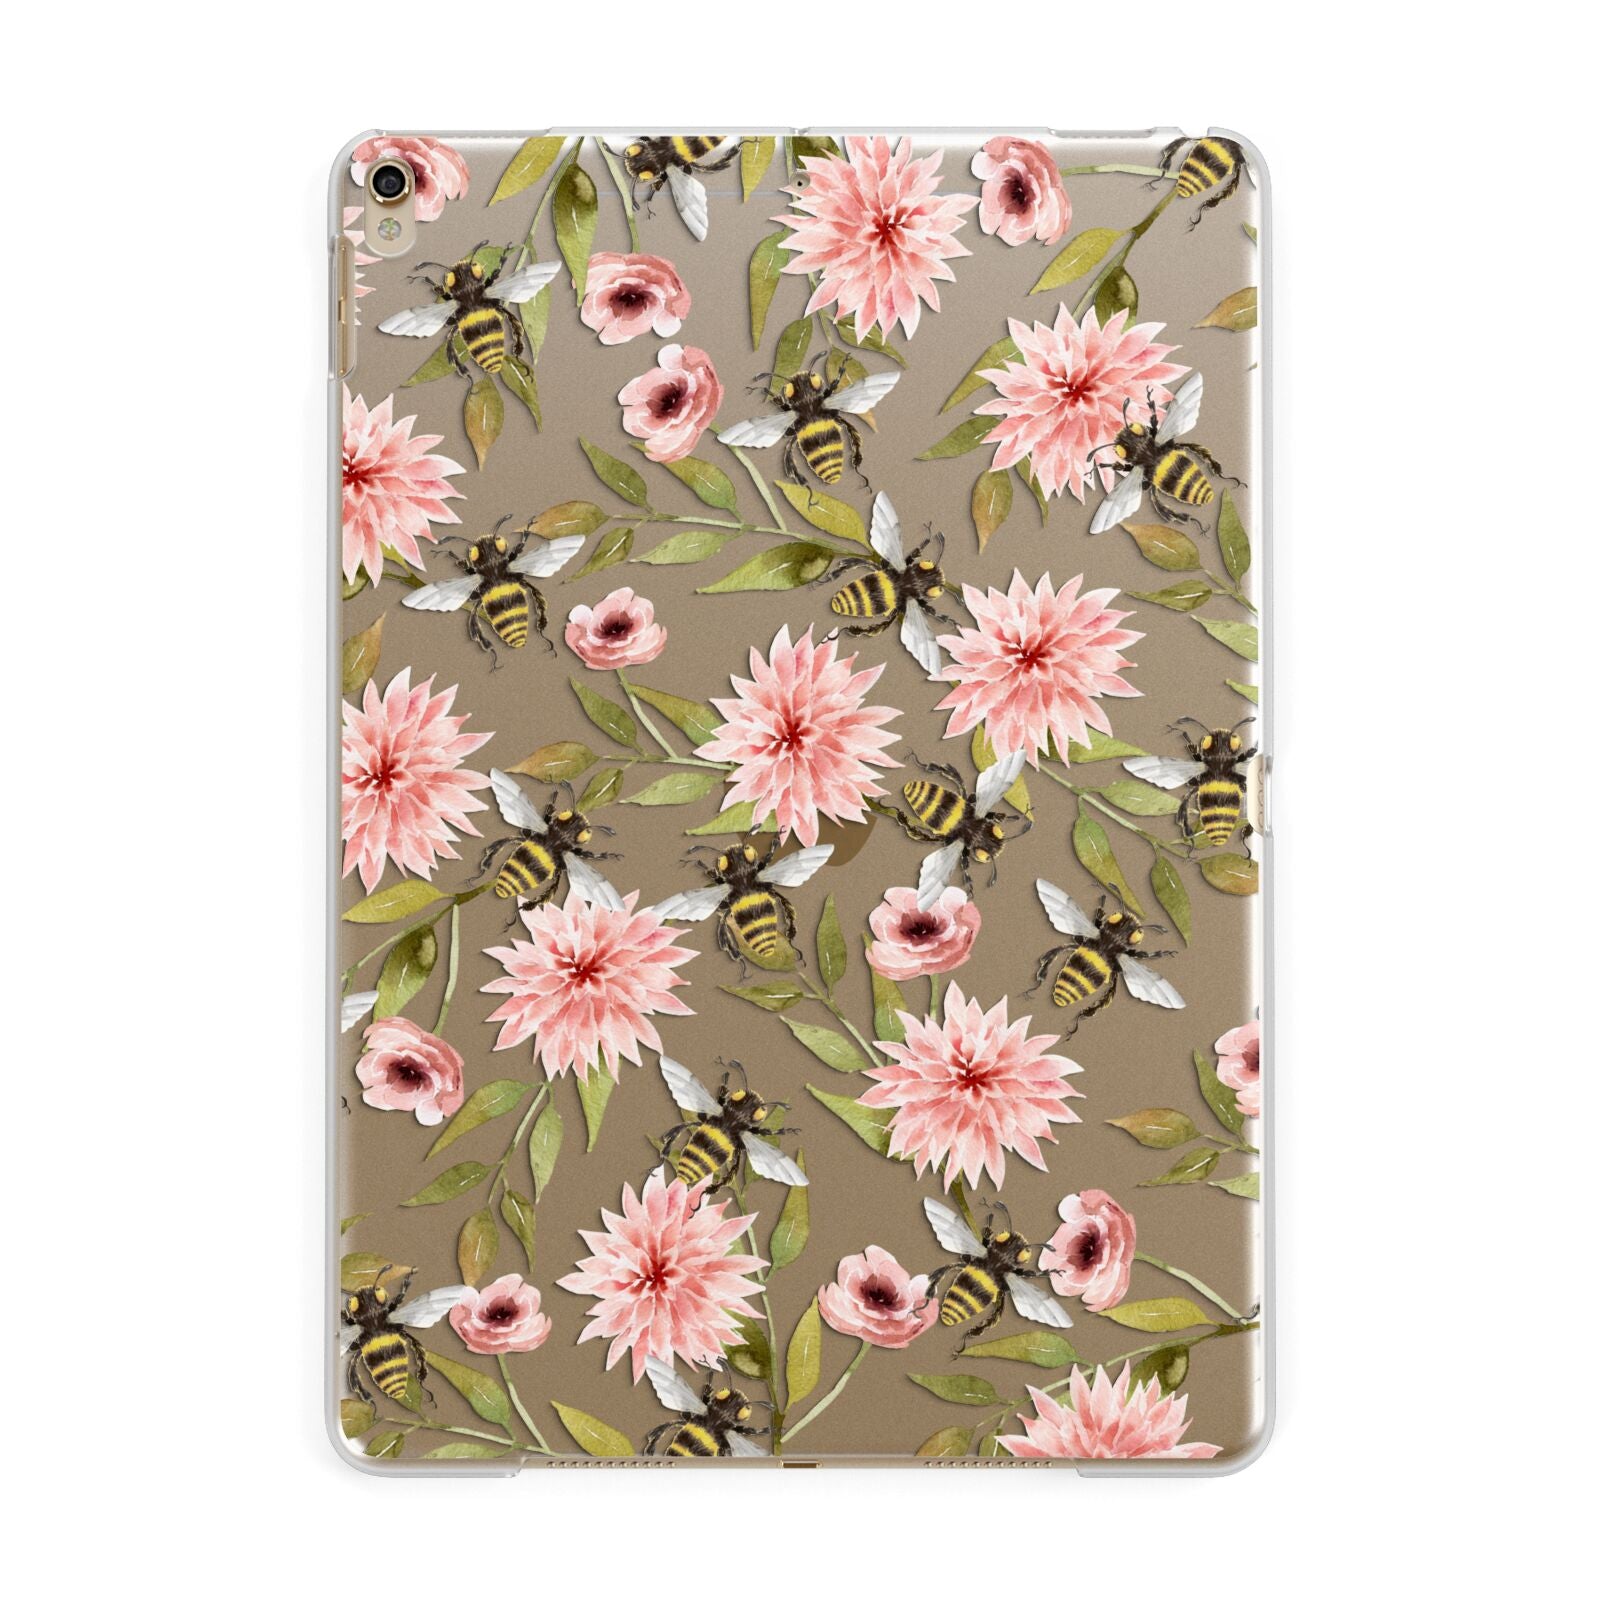 Clear Pink Flowers and Bees Apple iPad Gold Case